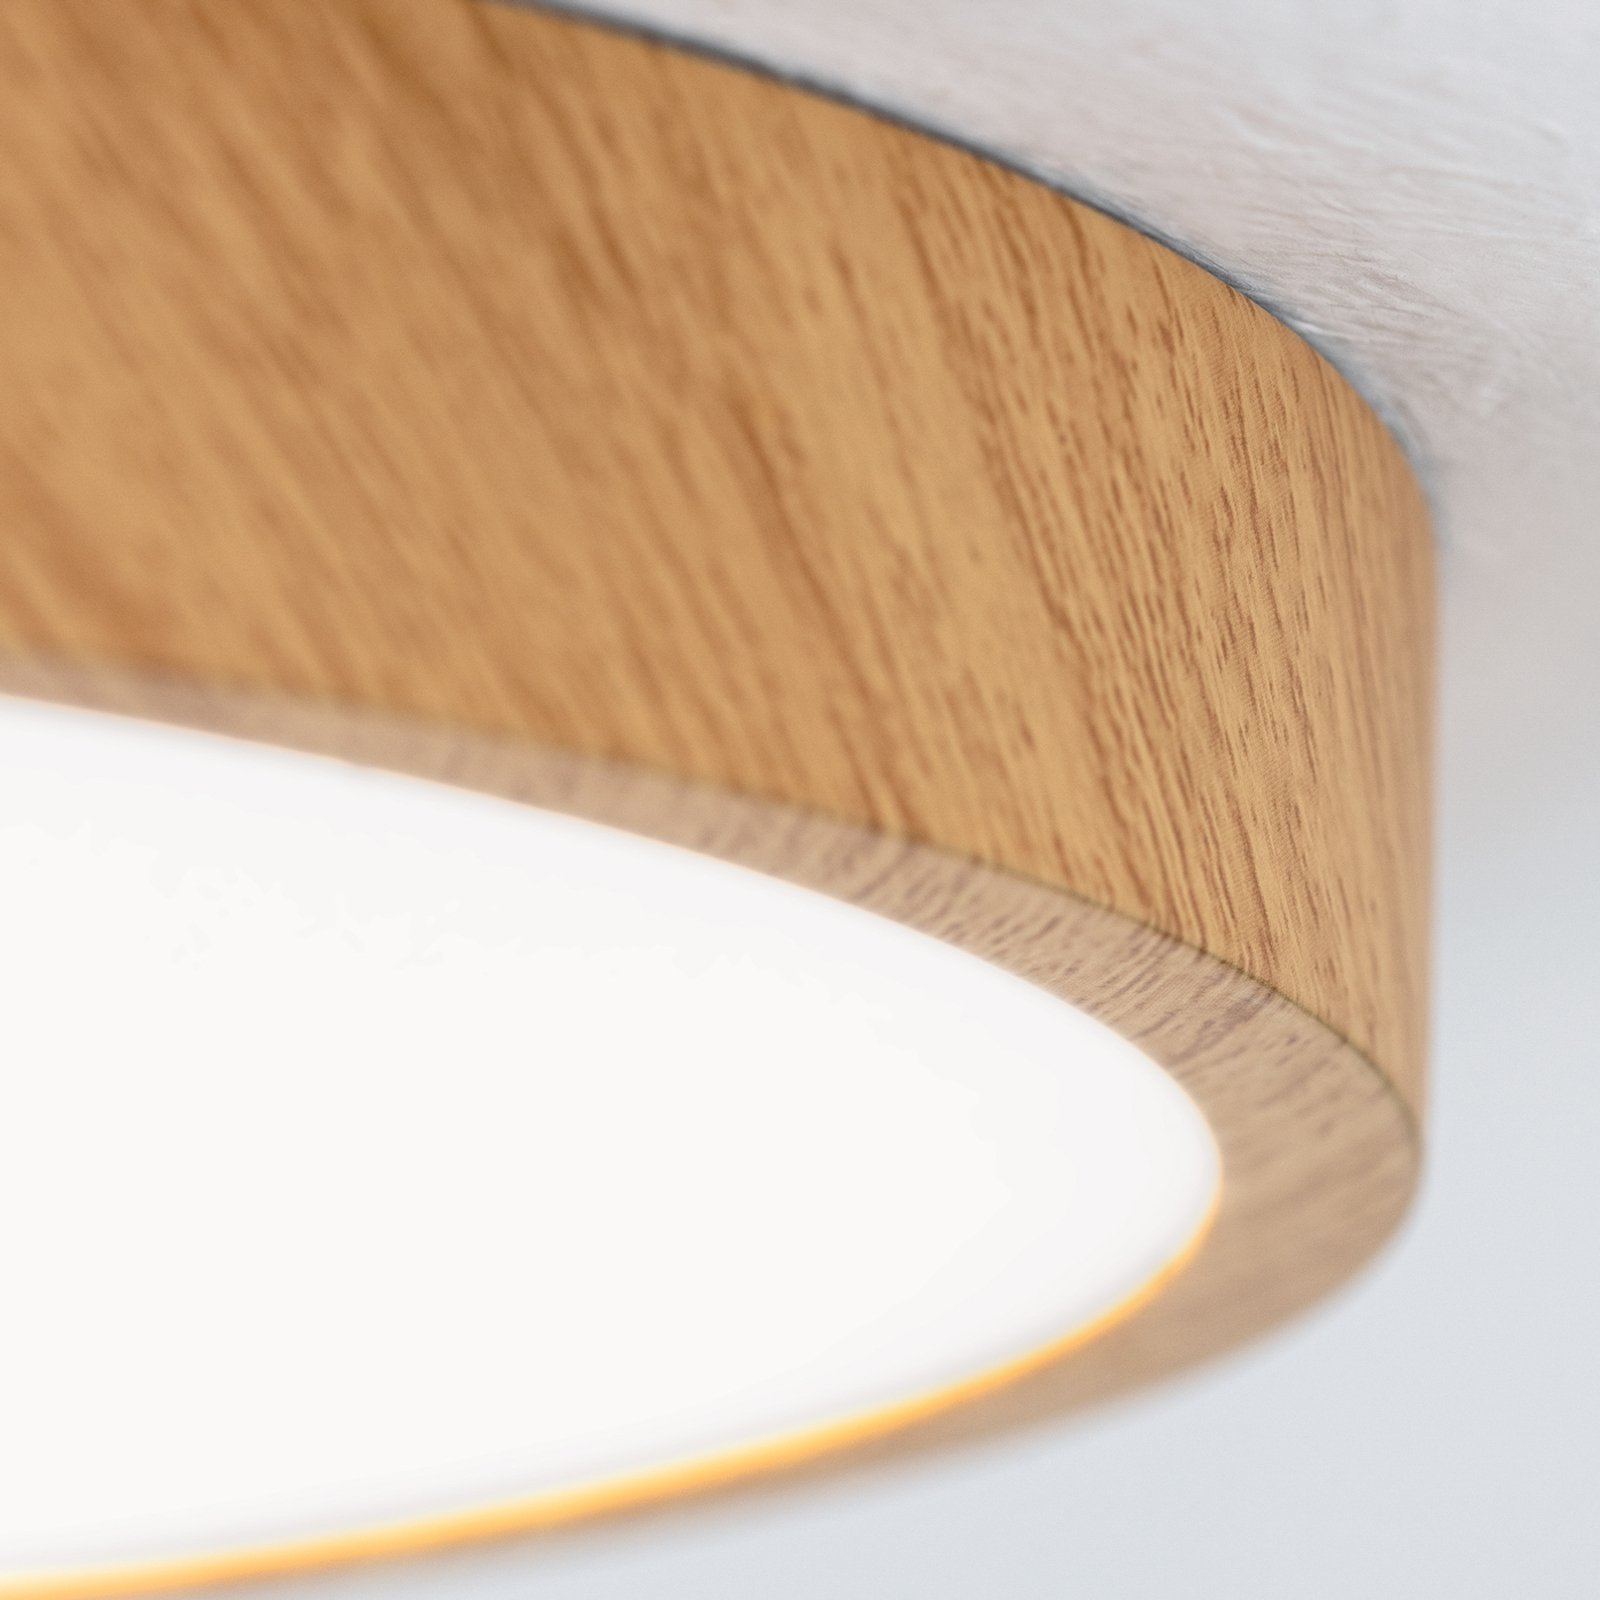 Bully LED ceiling light with a wooden look, 28 cm